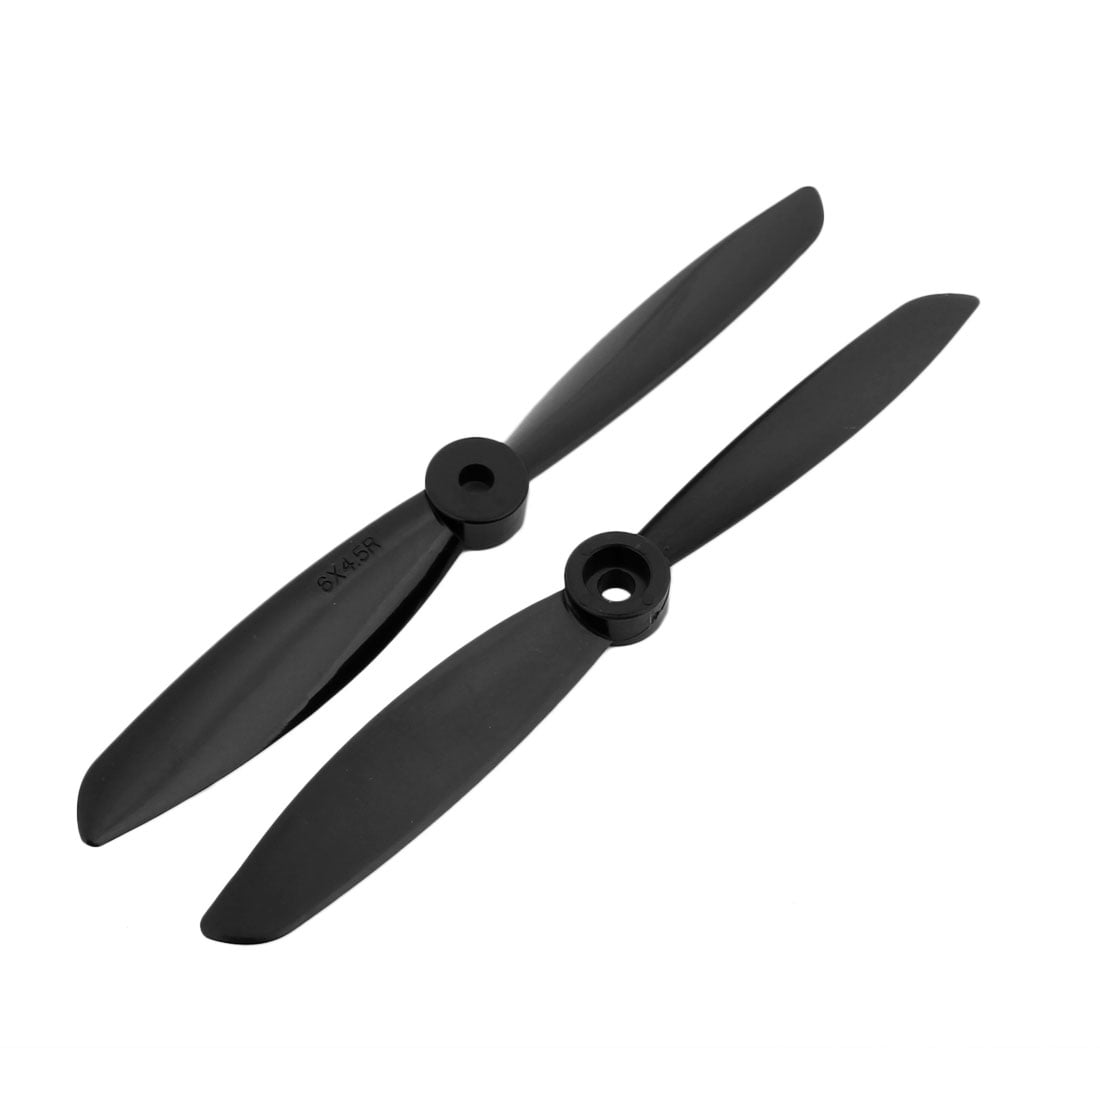 2 Pairs 6 x 4.5 Inches Black 2-Vanes Flat Prop Propeller for RC Aircraft 